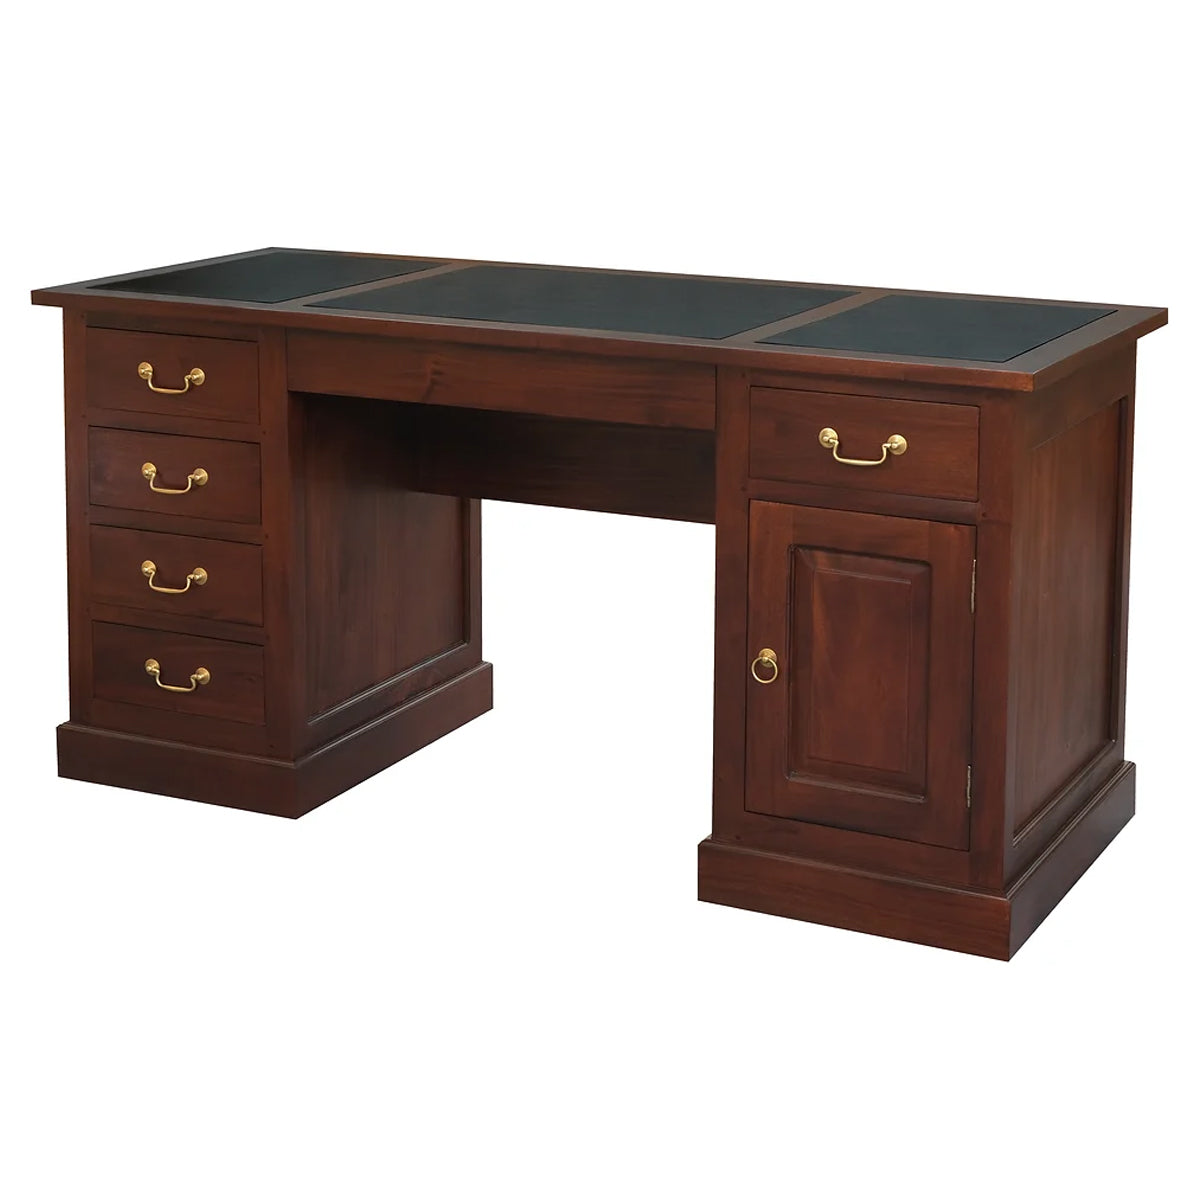 Tasmania Timber Desk with Faux Leather Top - Mahogany - Notbrand